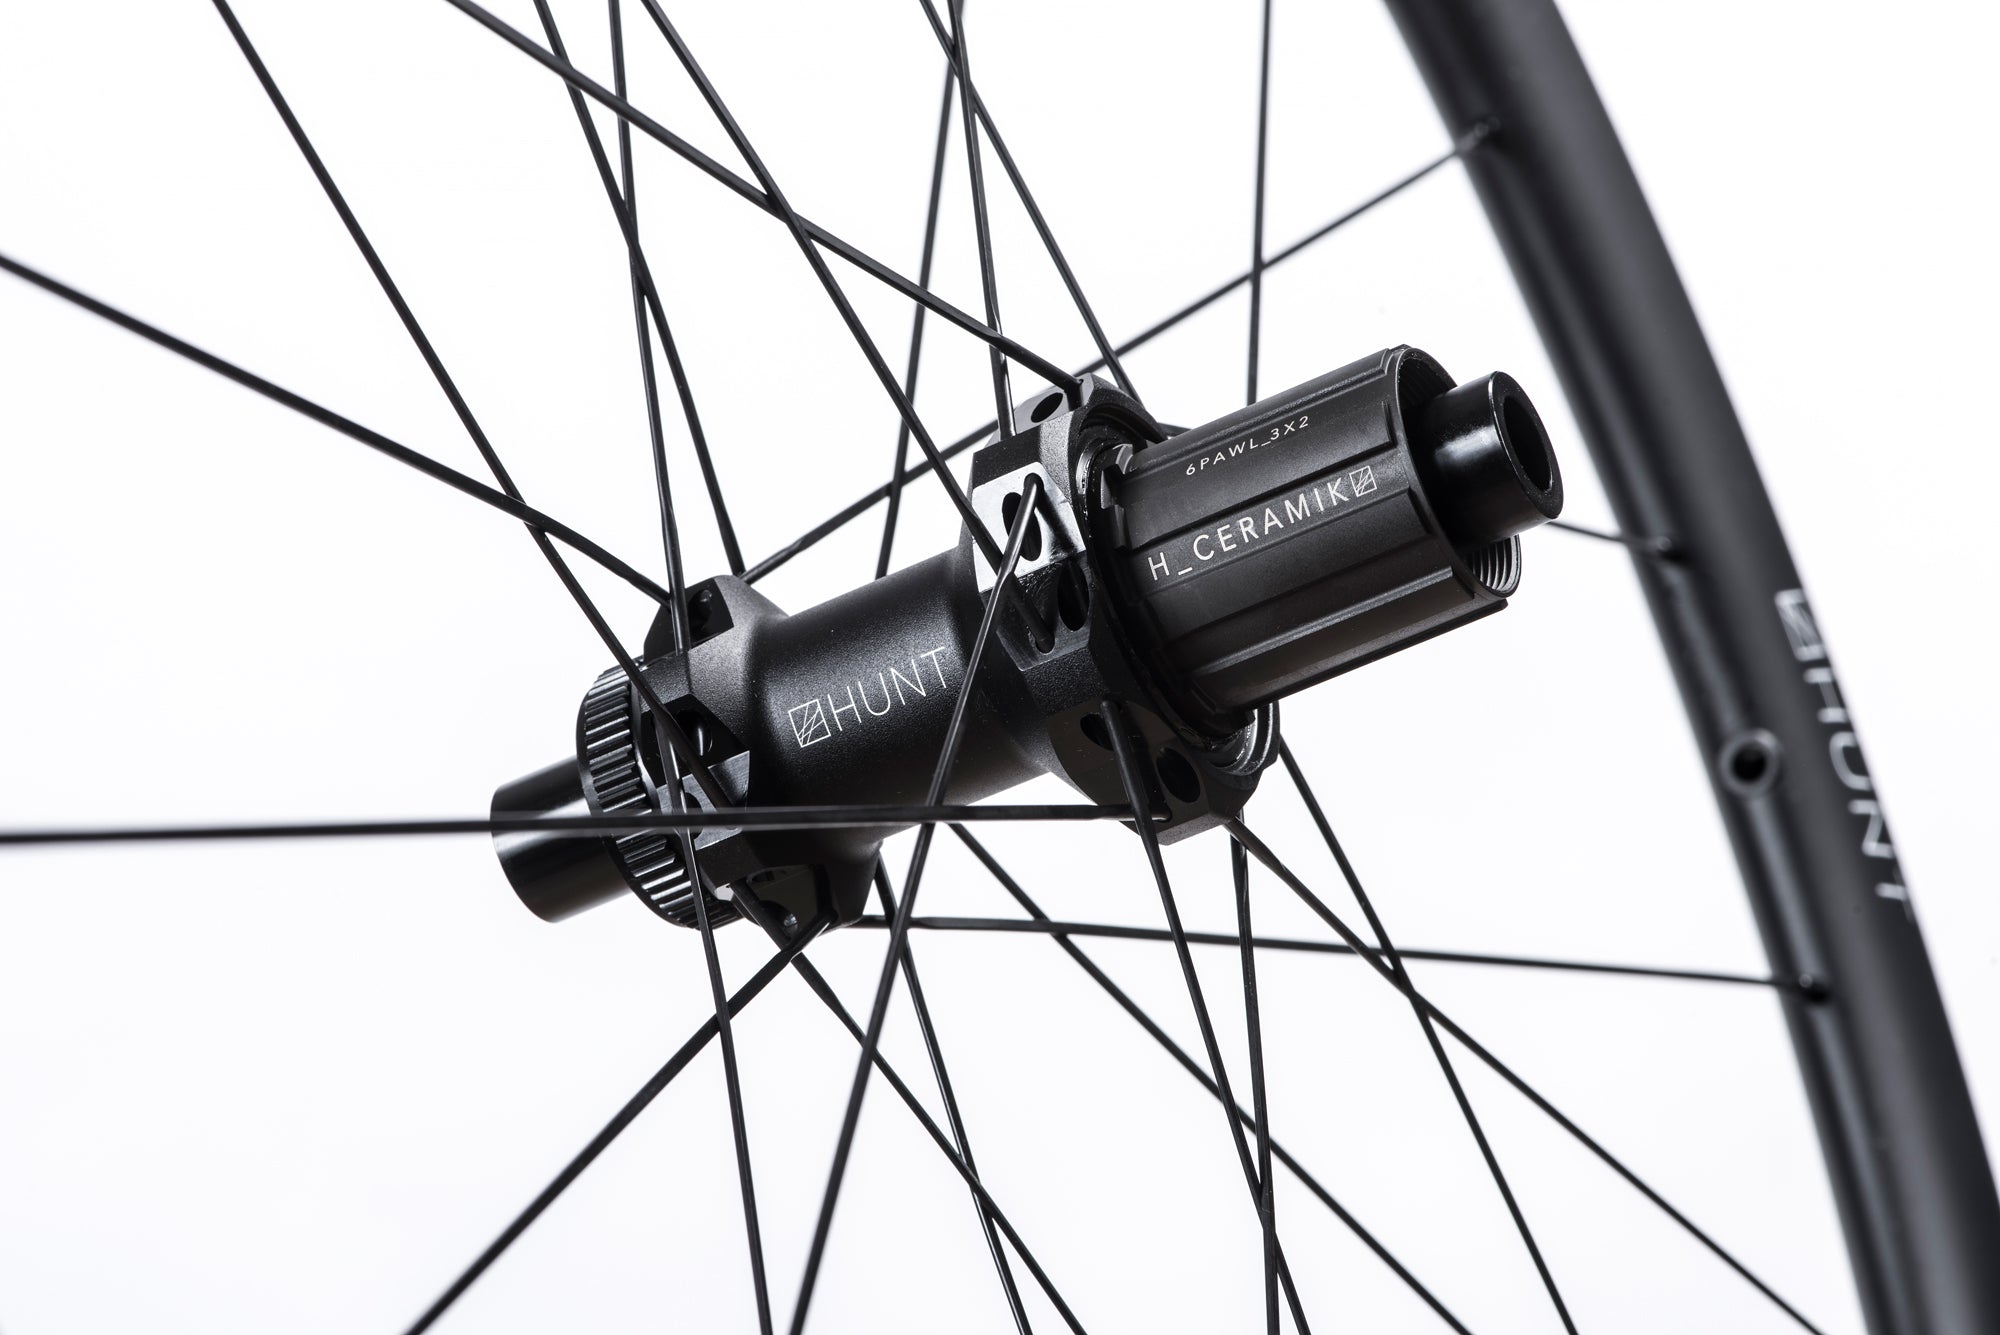 <h1>Freehub Body</h1><i>Durability is a theme for HUNT as time and money you spend fixing is time and money you cannot spend riding or upgrading your bikes. As a result, we’ve developed the H_CERAMIK coating to provide excellent durability and protect against cassette sprocket damage often seen on standard alloy freehub bodies.</i>